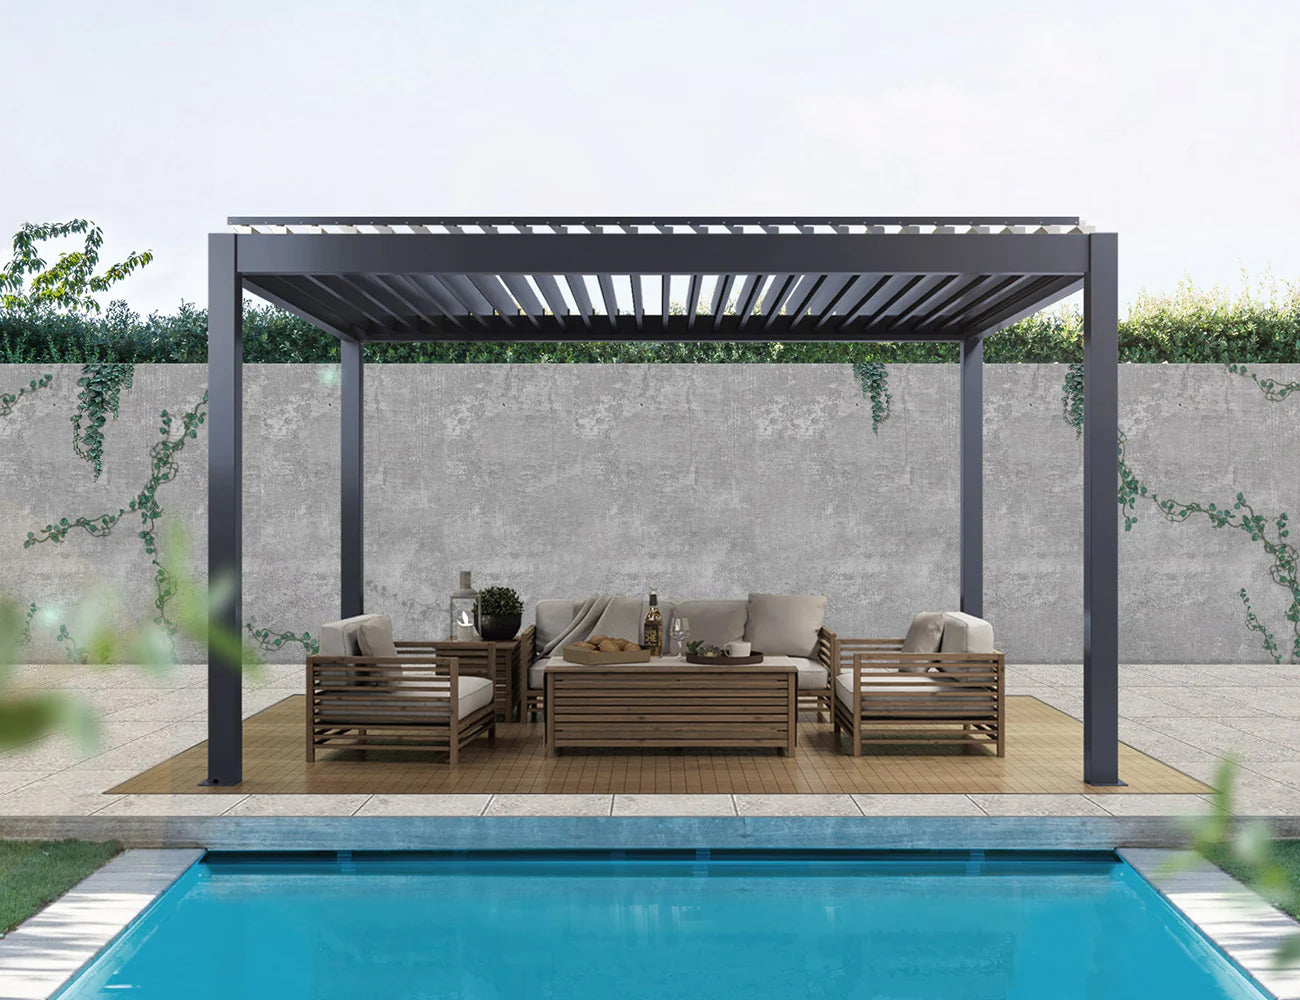 Custom Pergola Kits, Patio Covers, Awnings, and Blinds - Luxi Living